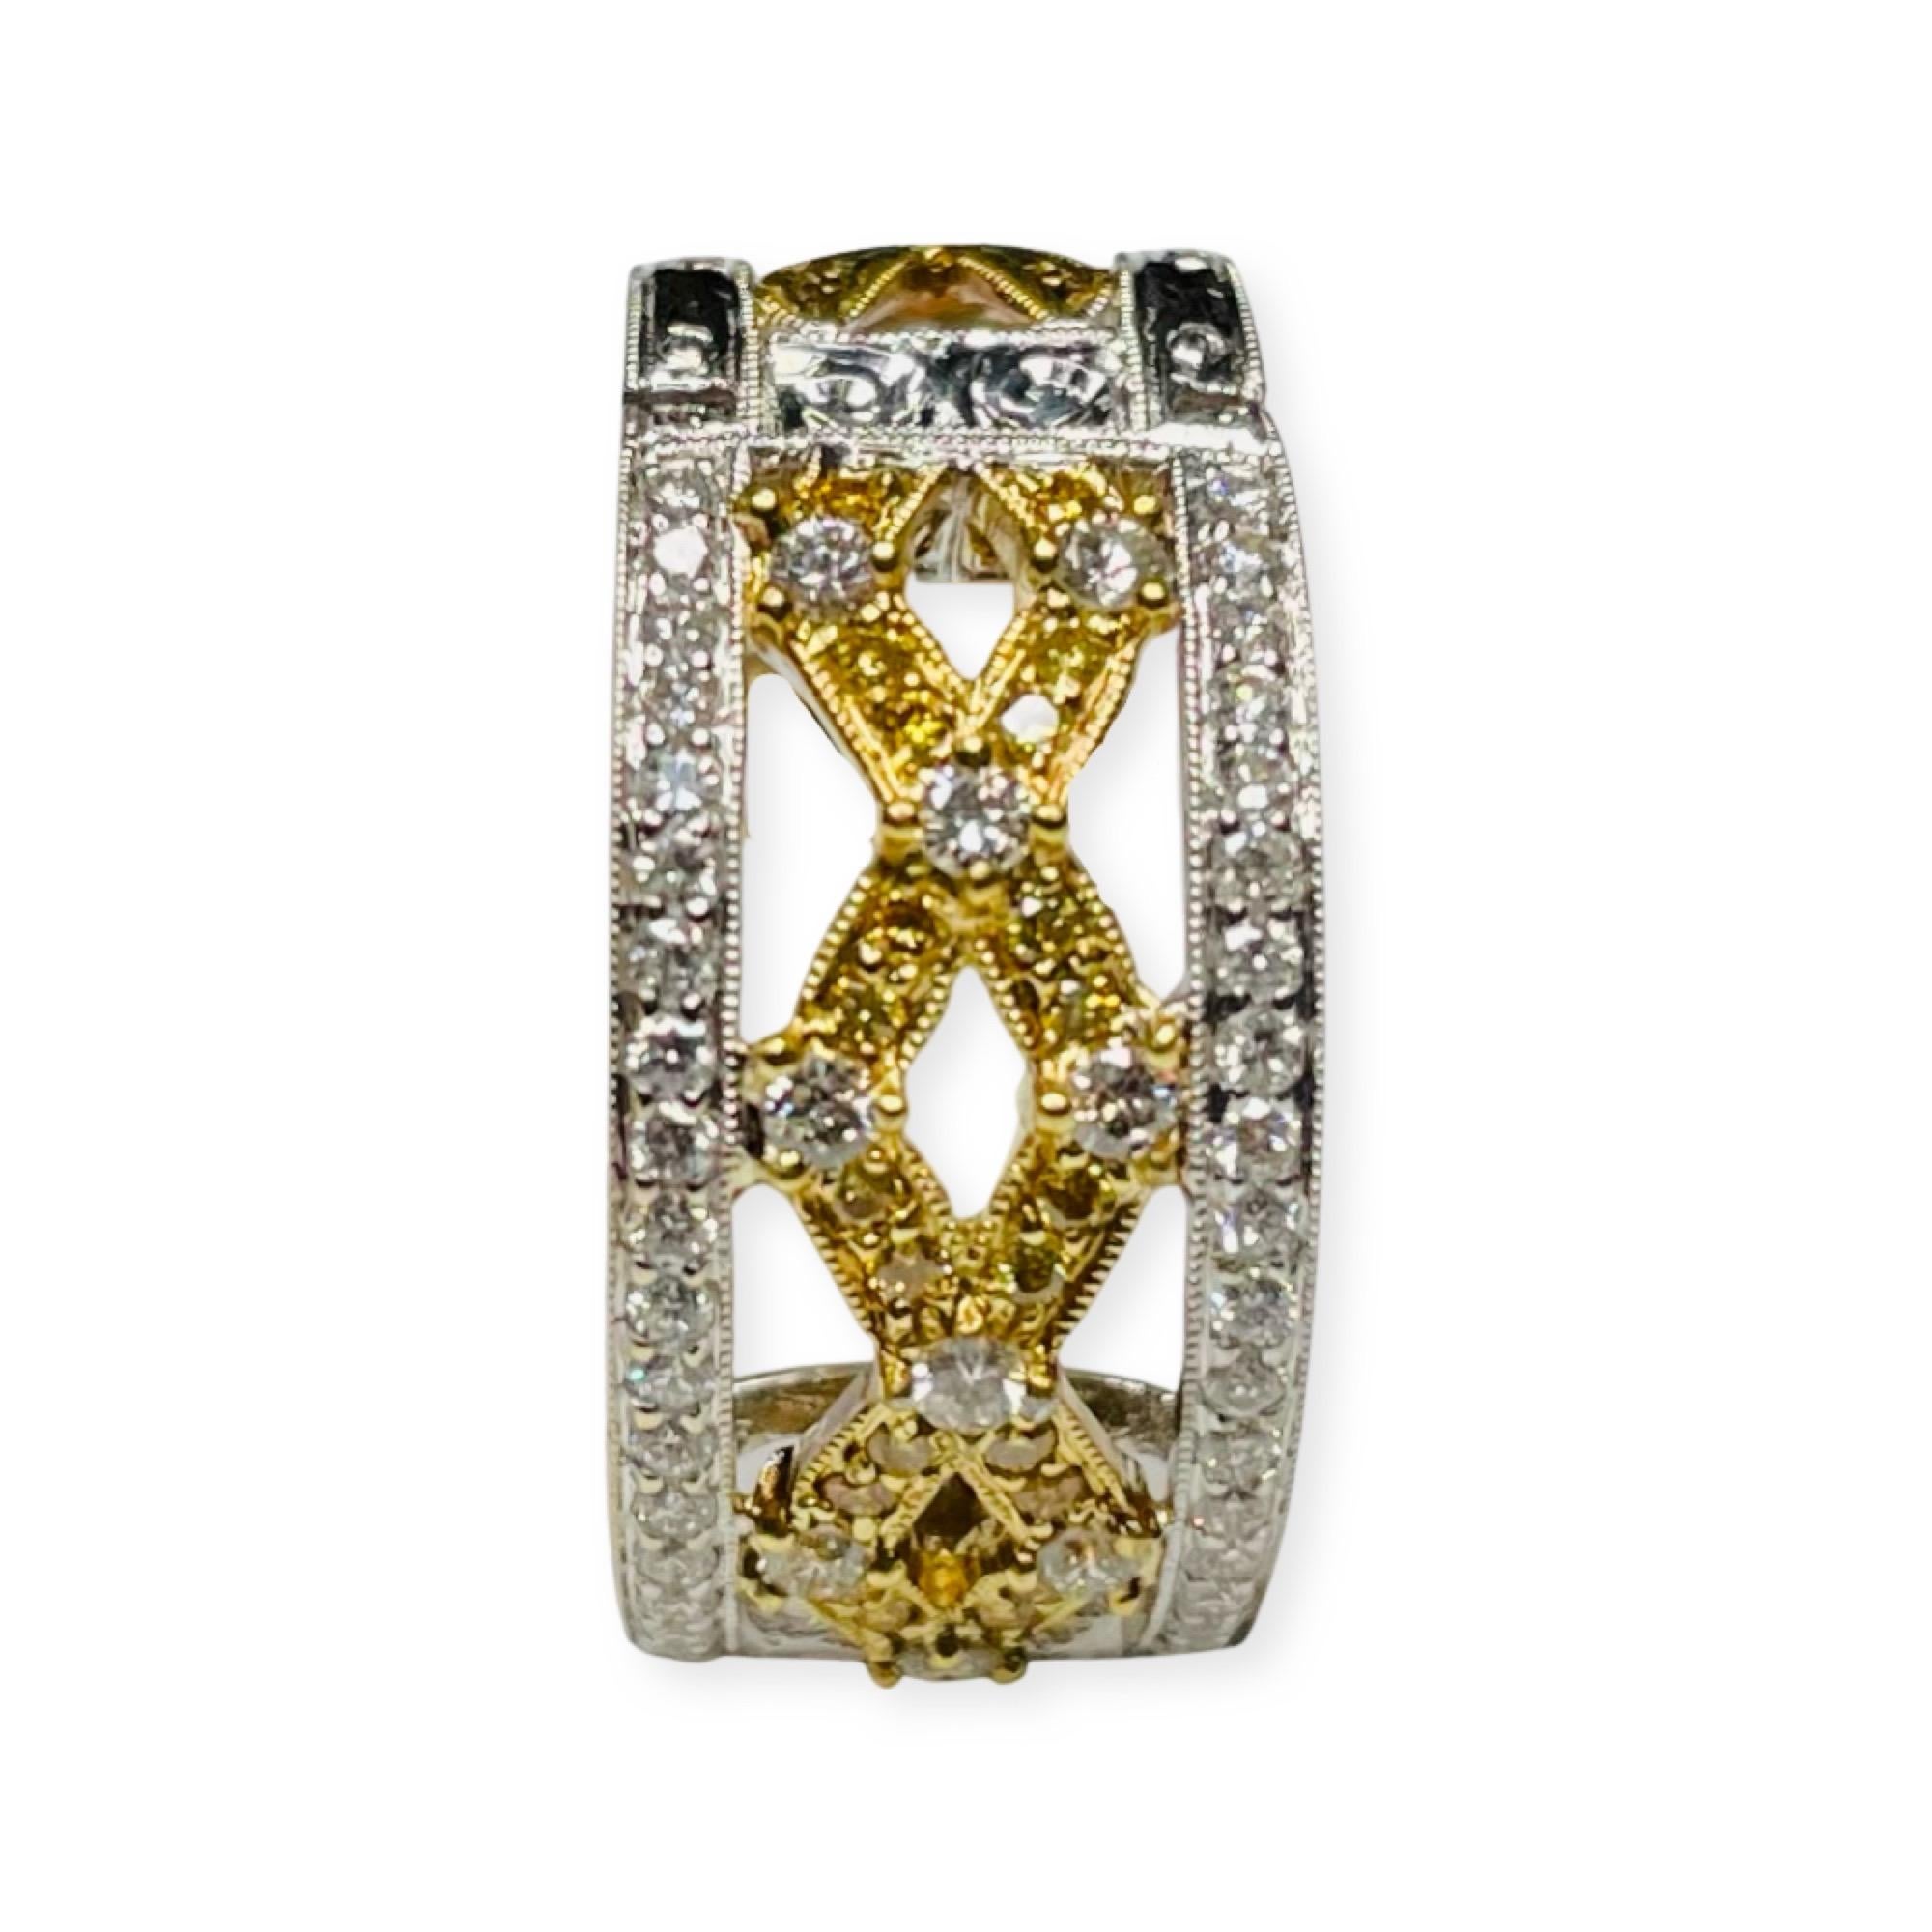 Simon G 18K White & Yellow Gold Reversible Huggie Diamond Earrings In New Condition For Sale In Kirkwood, MO